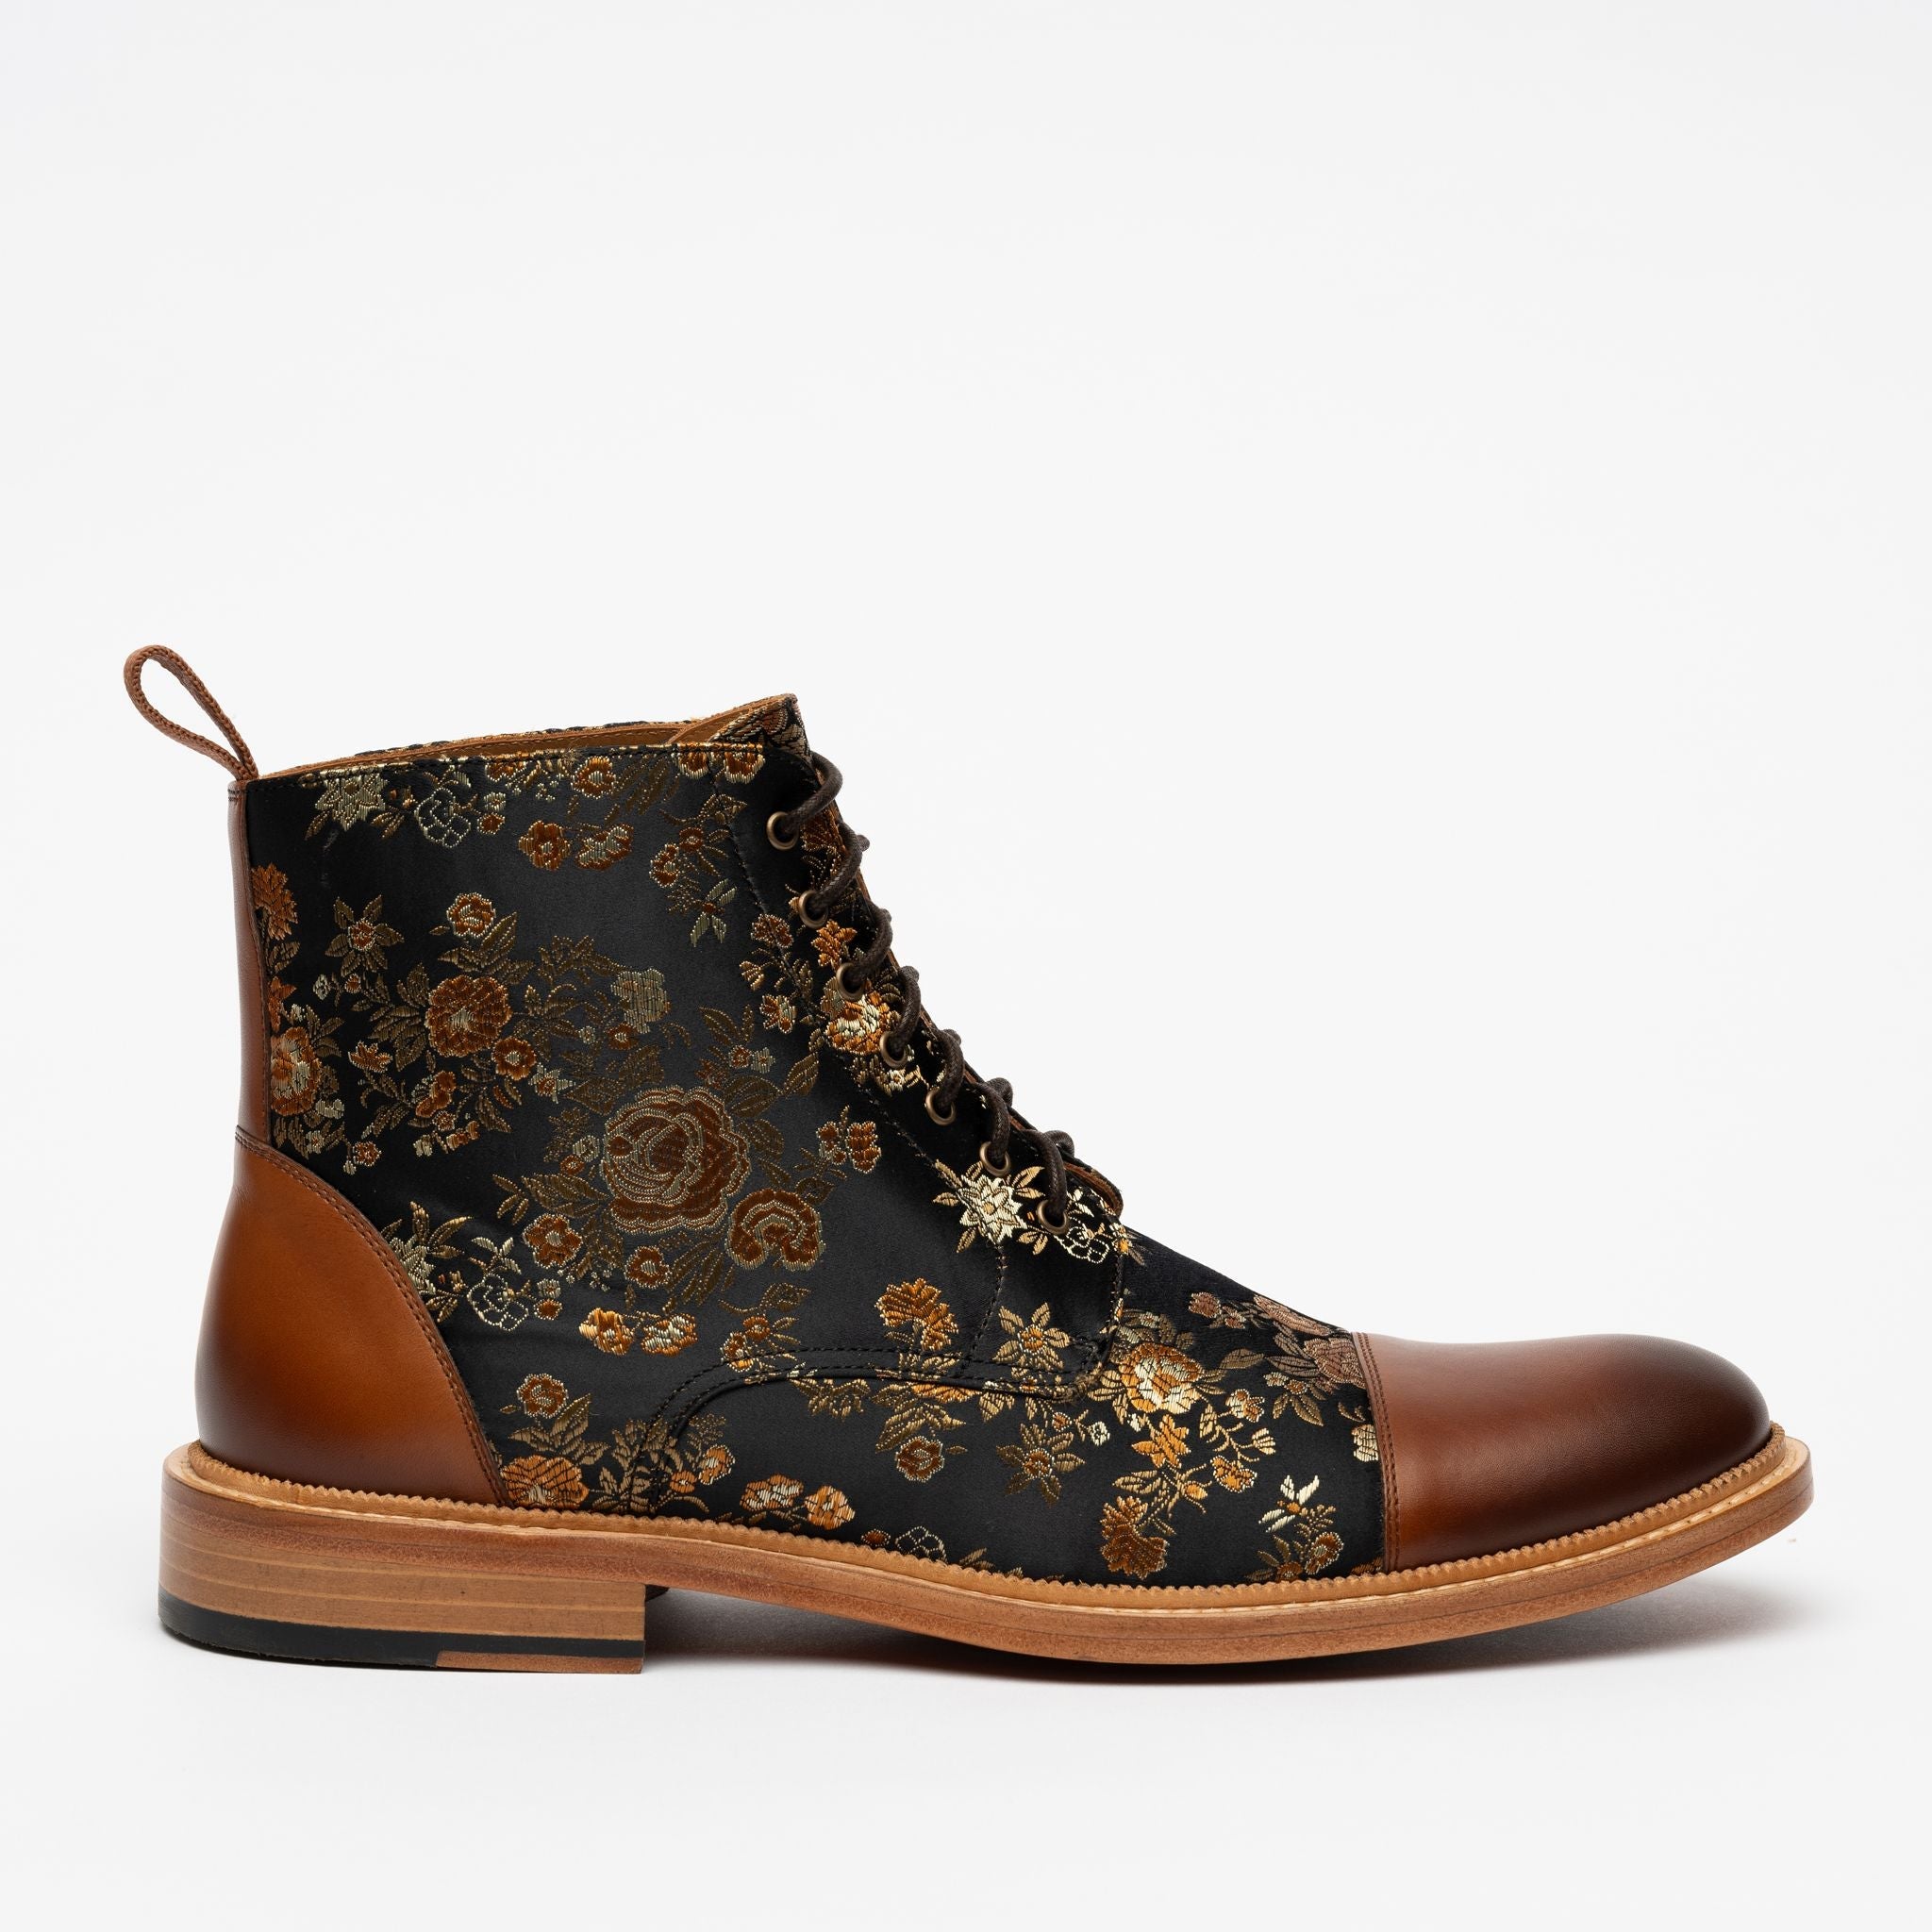 The Jack in Eden High Boot